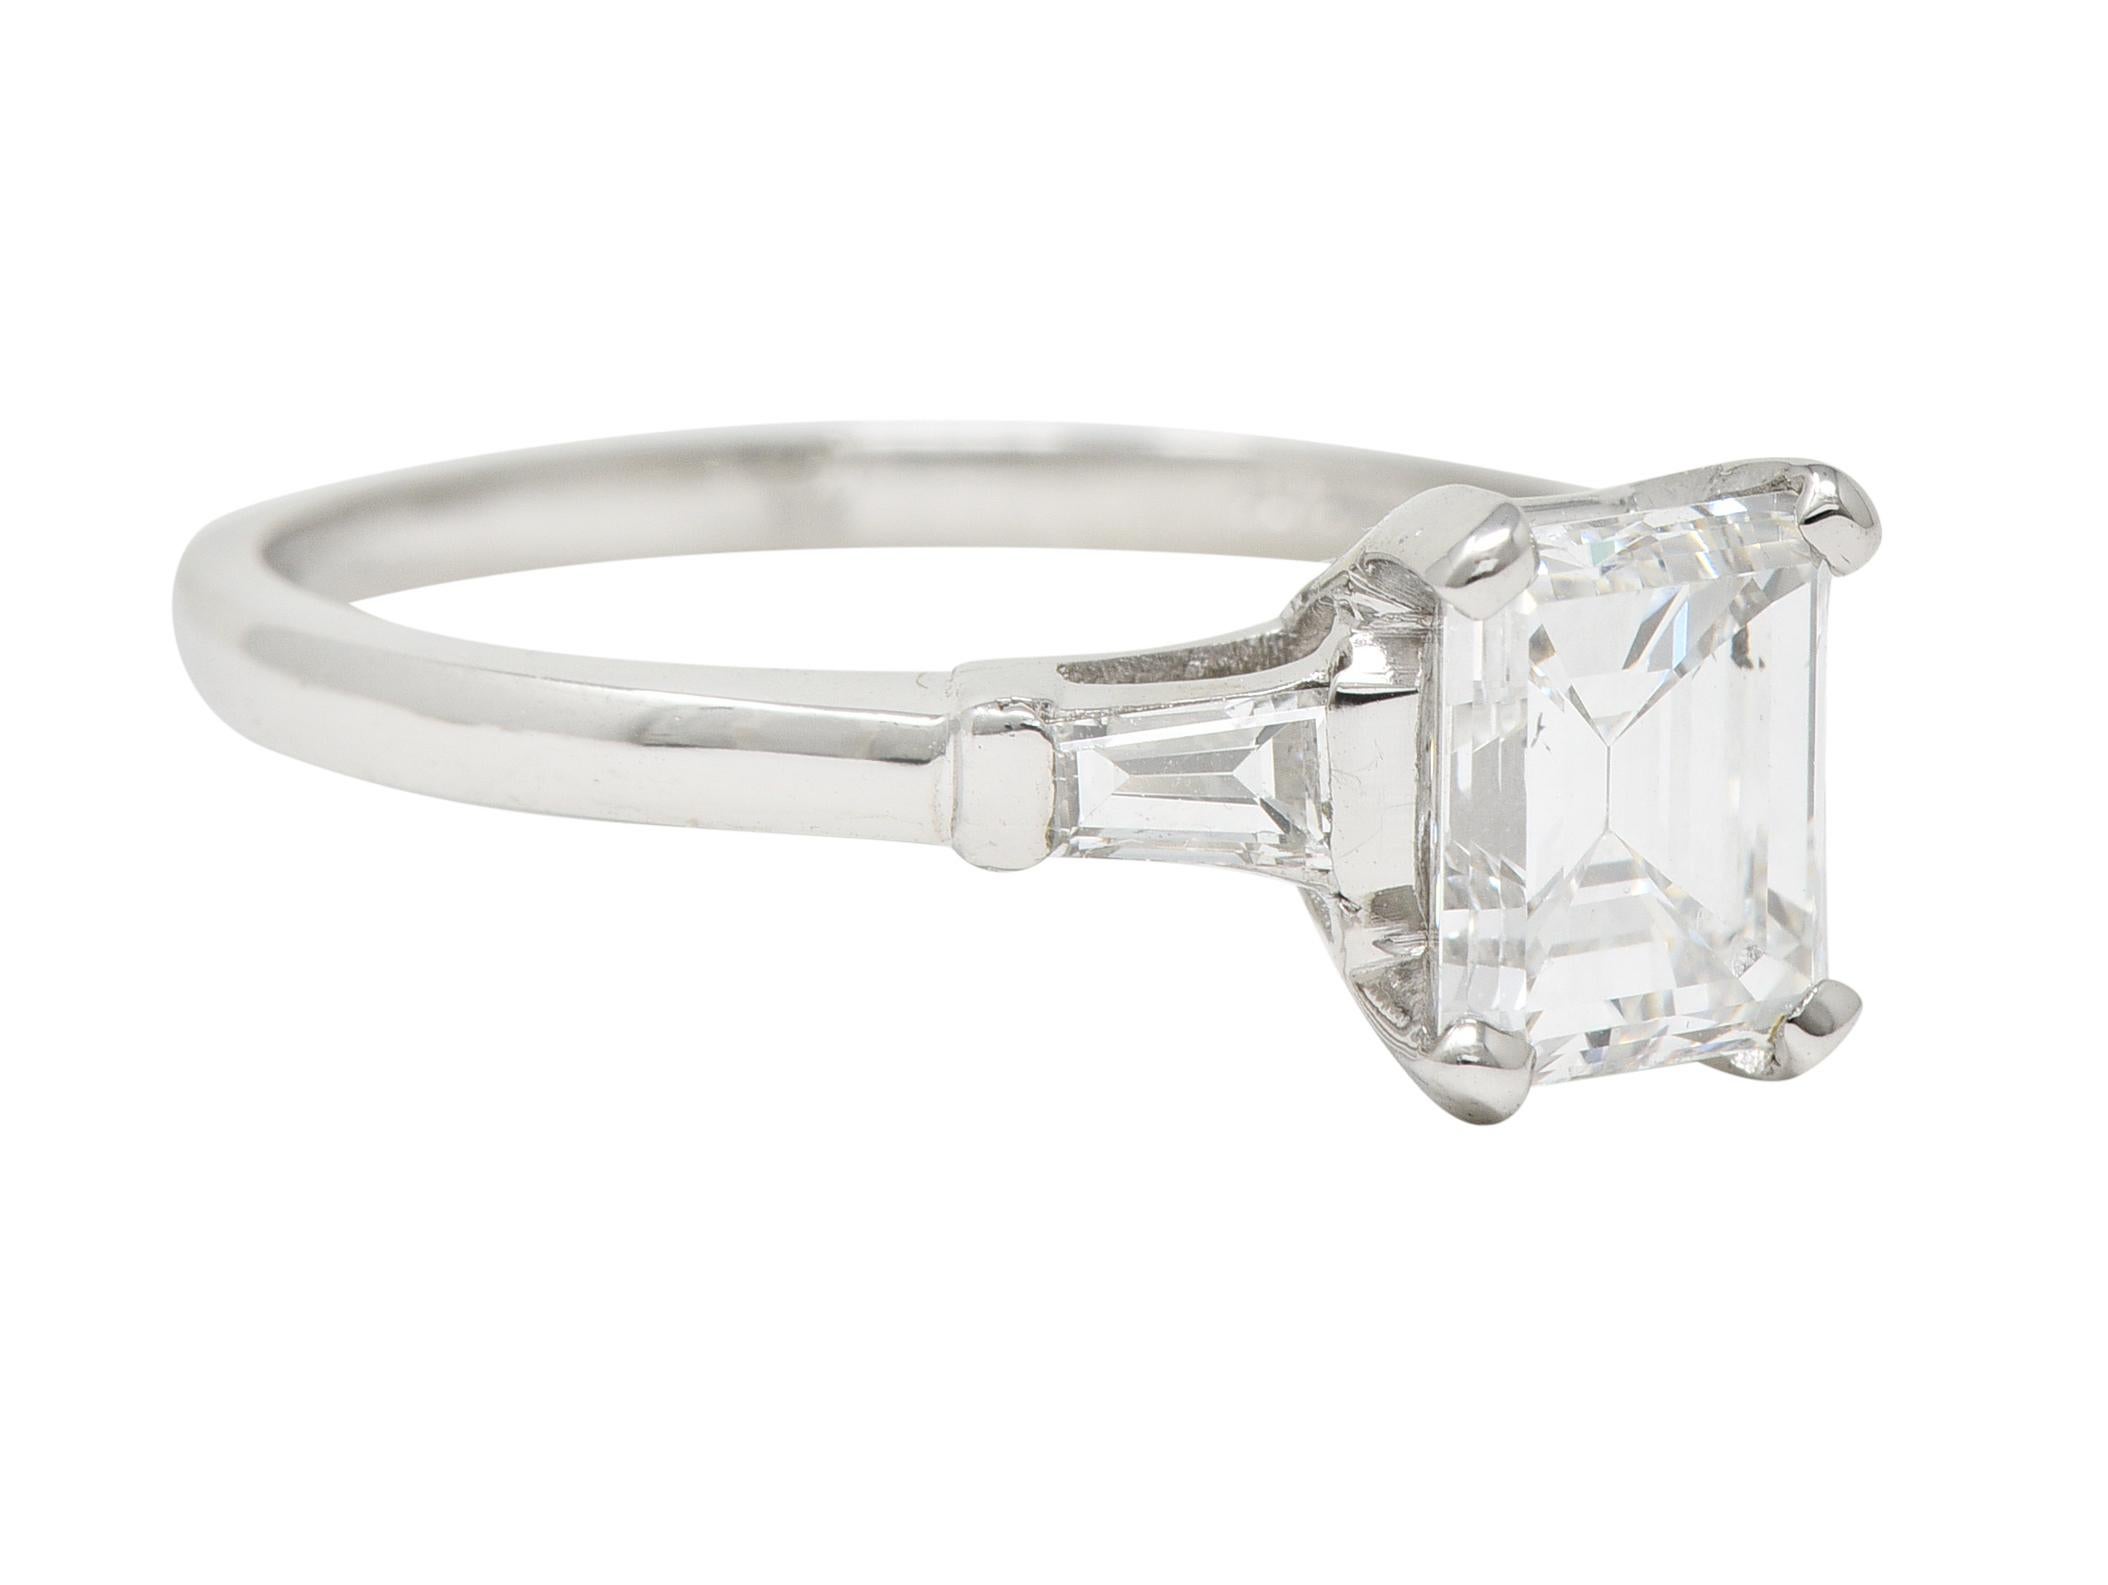 Centering an emerald cut diamond weighing 1.78 carats total - E color with SI1 clarity. Prong set in a basket and flanked by tapered baguette cut diamonds. Weighing approximately 0.24 carat total - well matched to center. Bar set in cathedral style